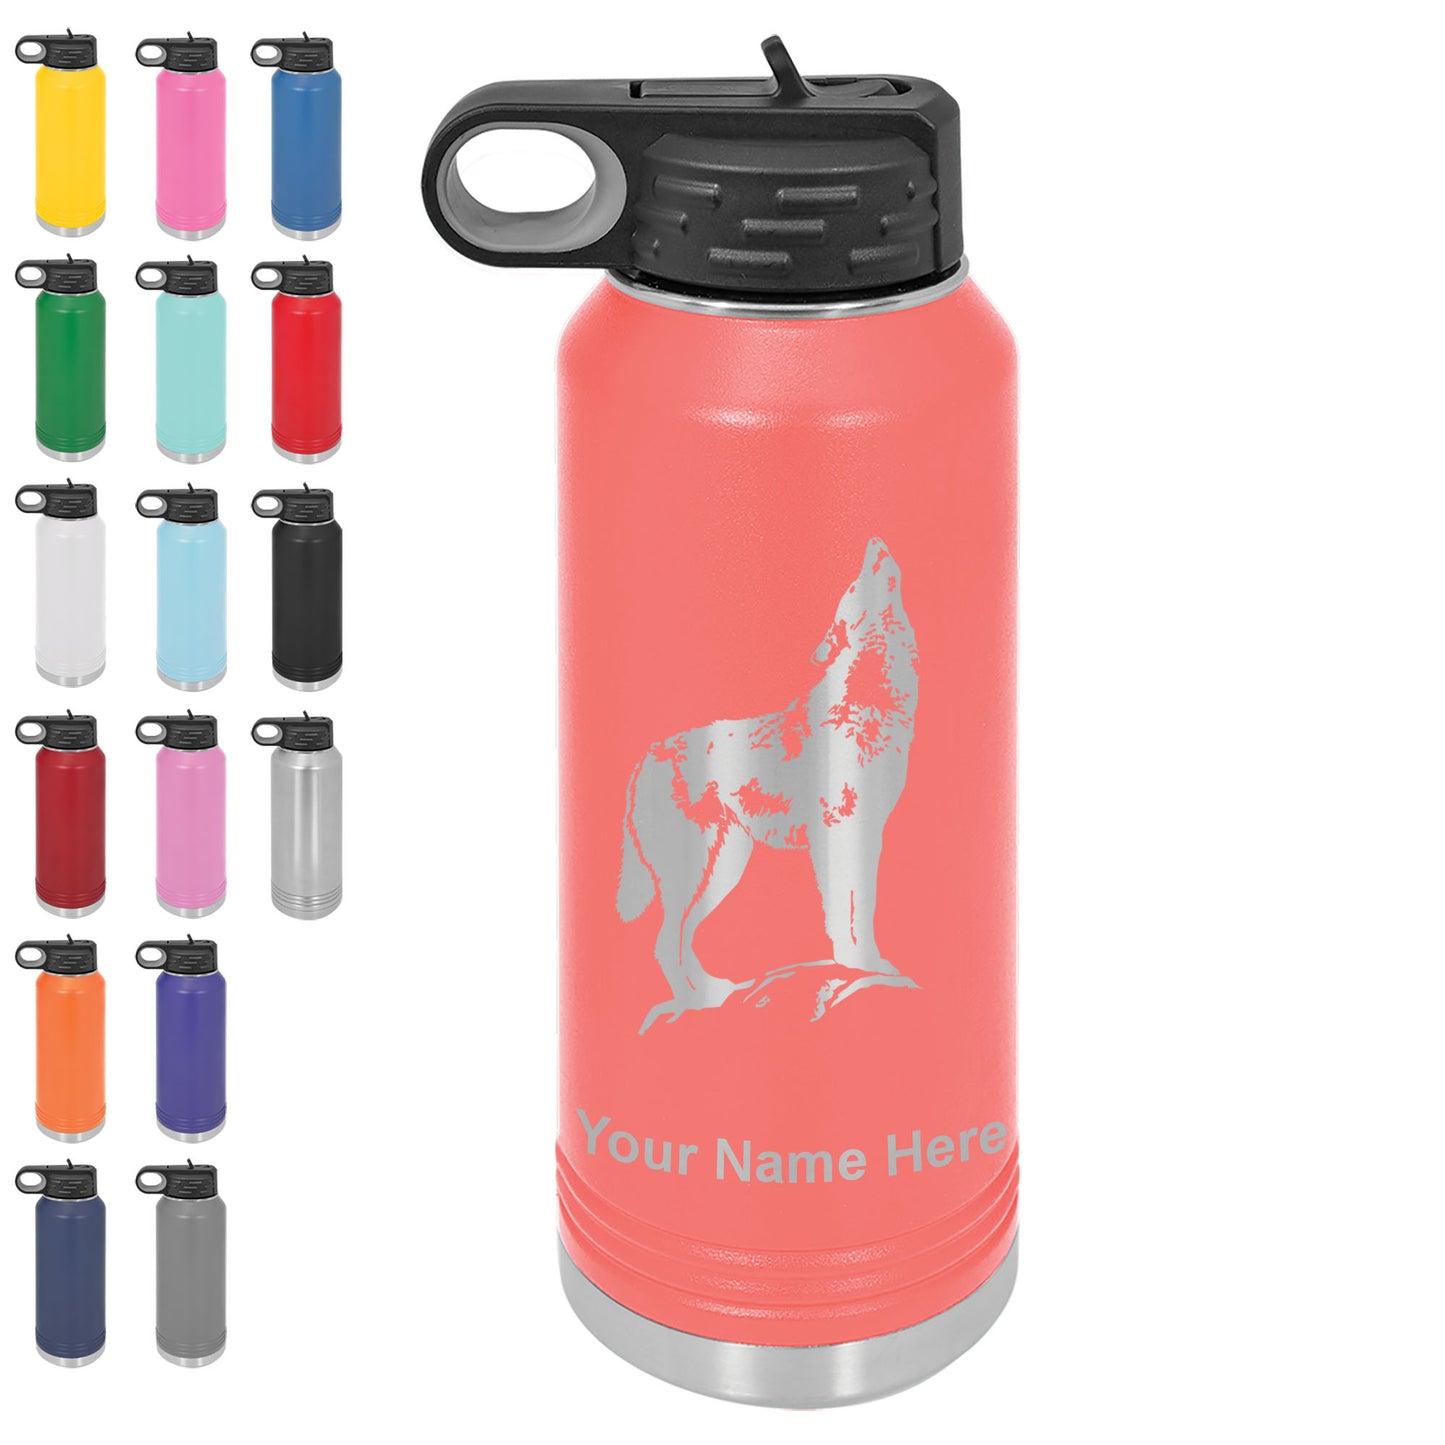 LaserGram 32oz Double Wall Flip Top Water Bottle with Straw, Howling Wolf, Personalized Engraving Included